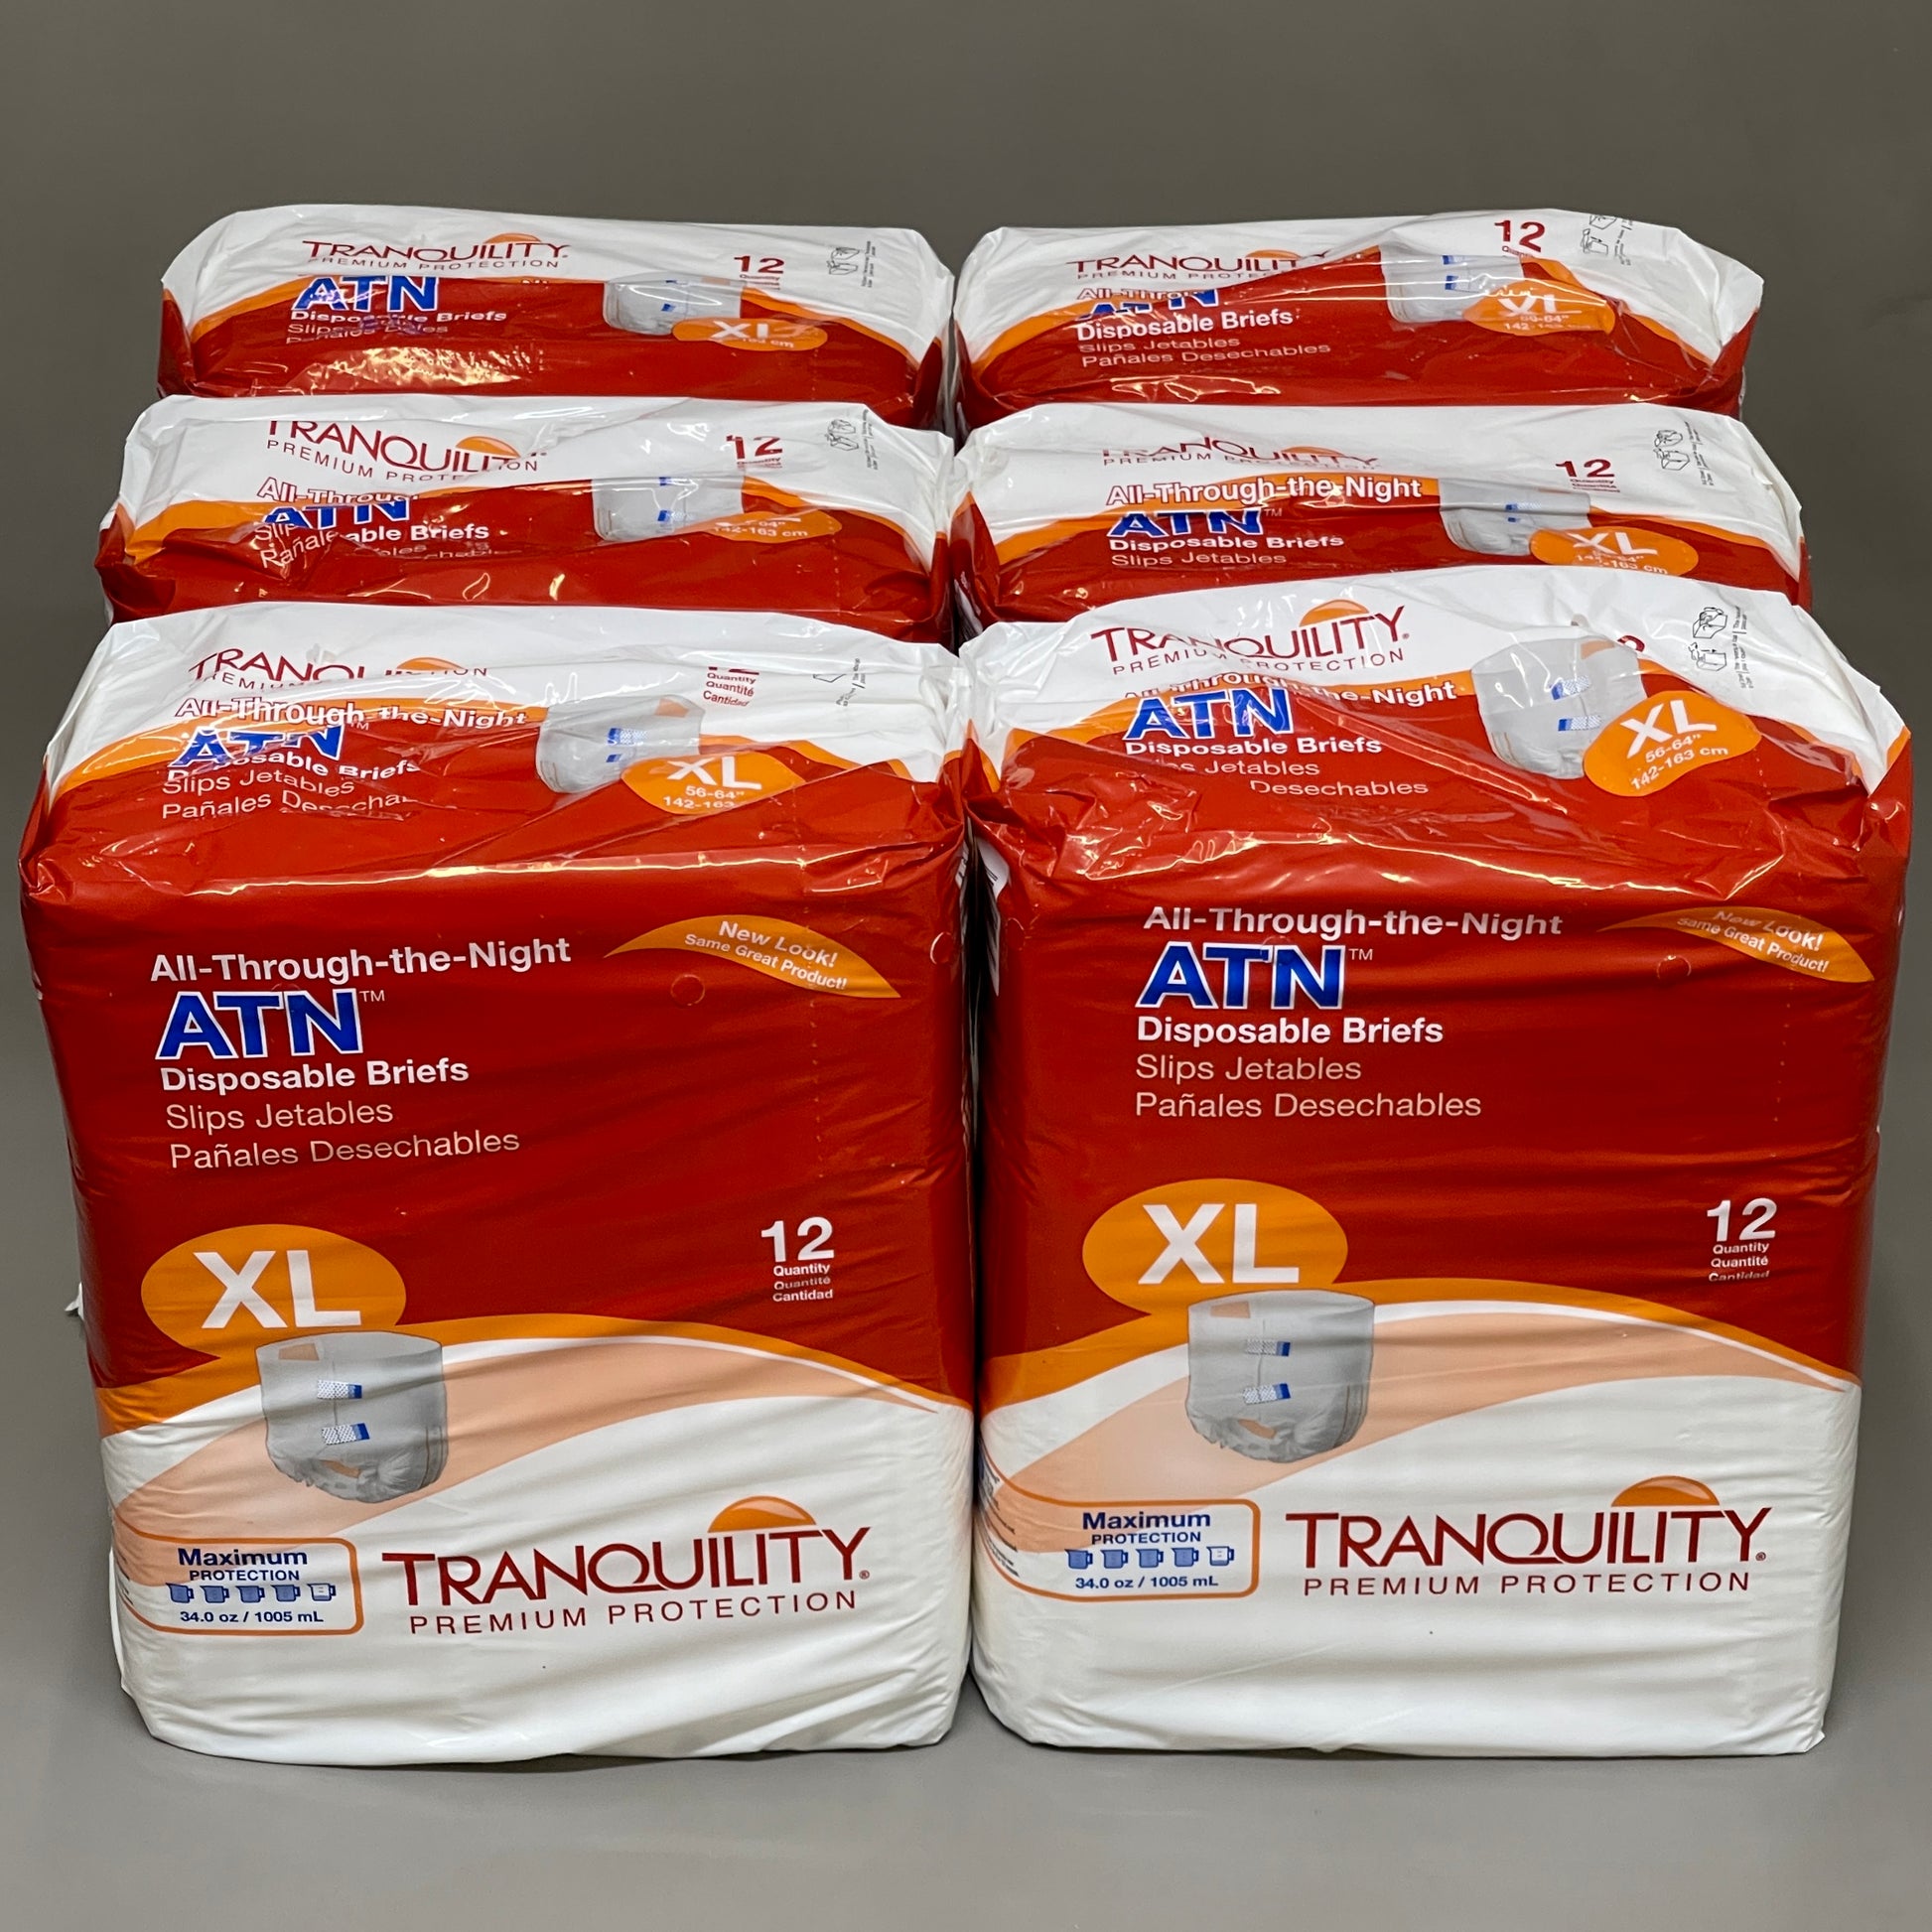 Tranquility ATN Disposable Briefs 